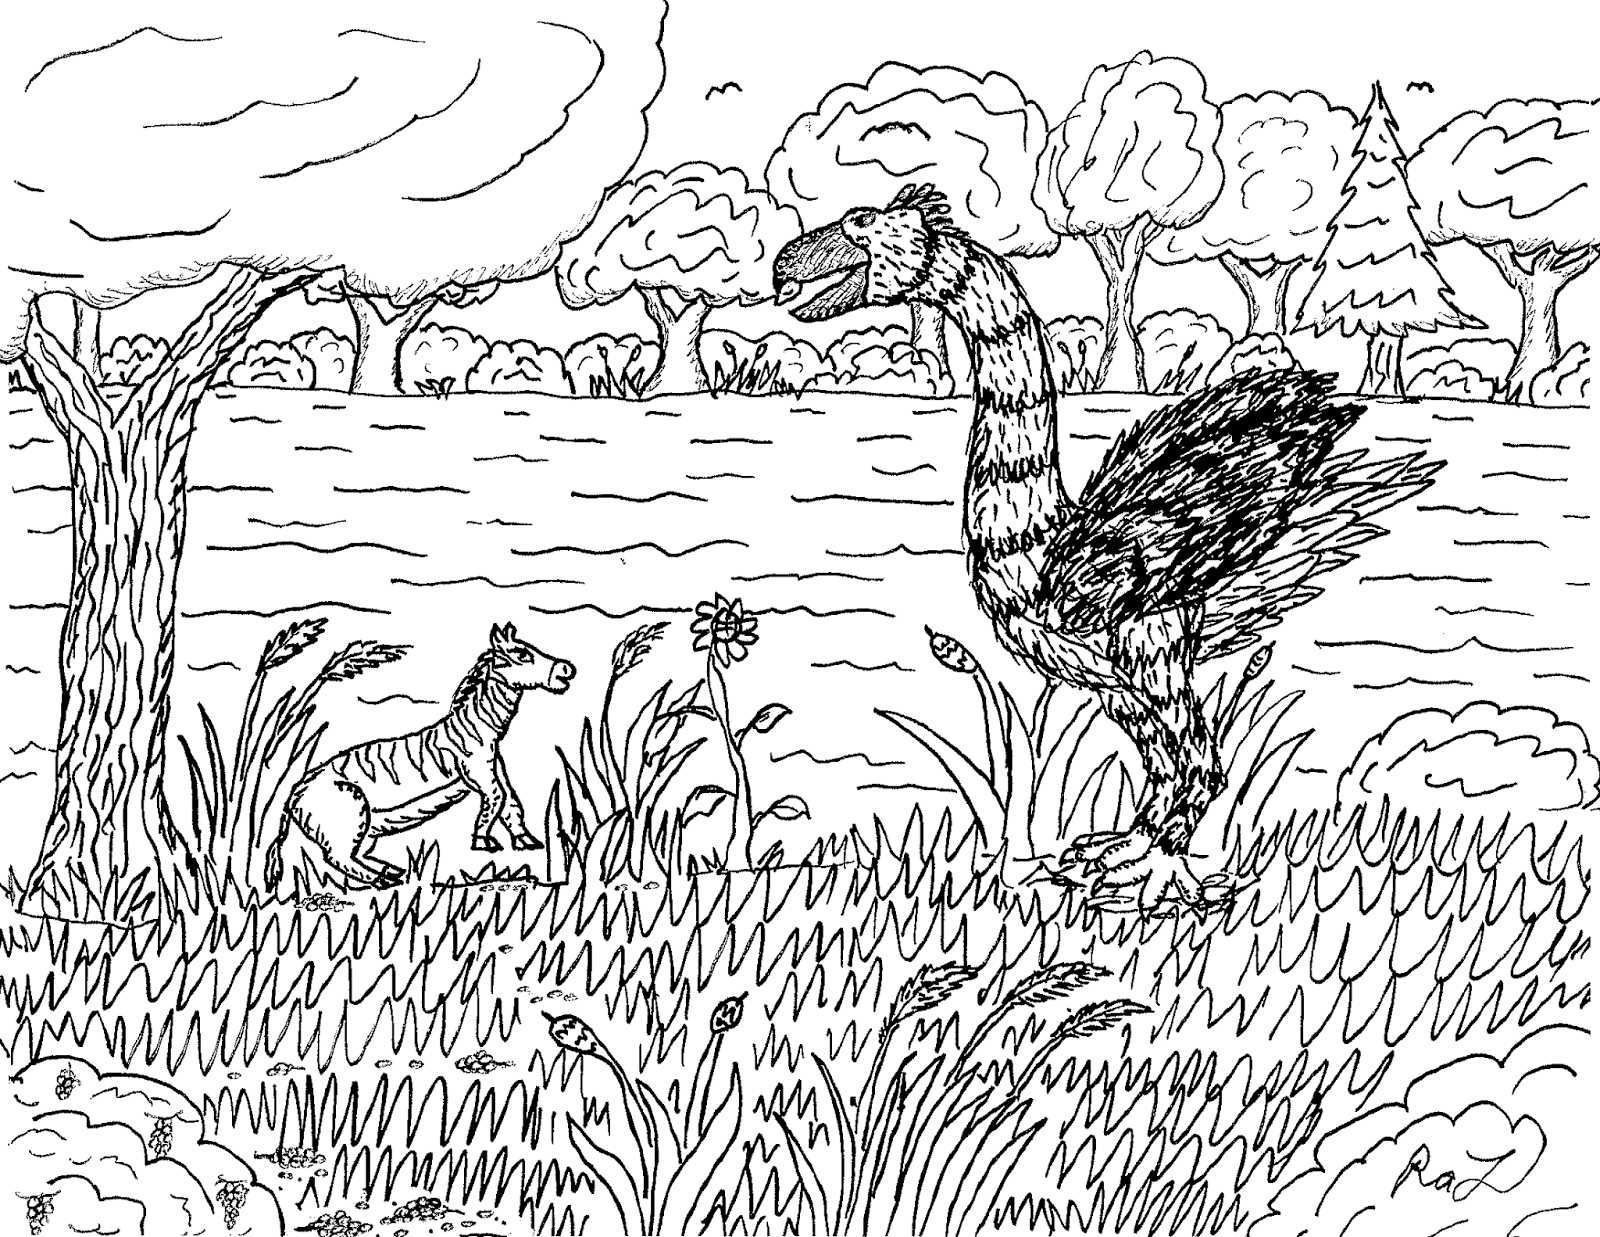 Robin's Great Coloring Pages: Terror Birds